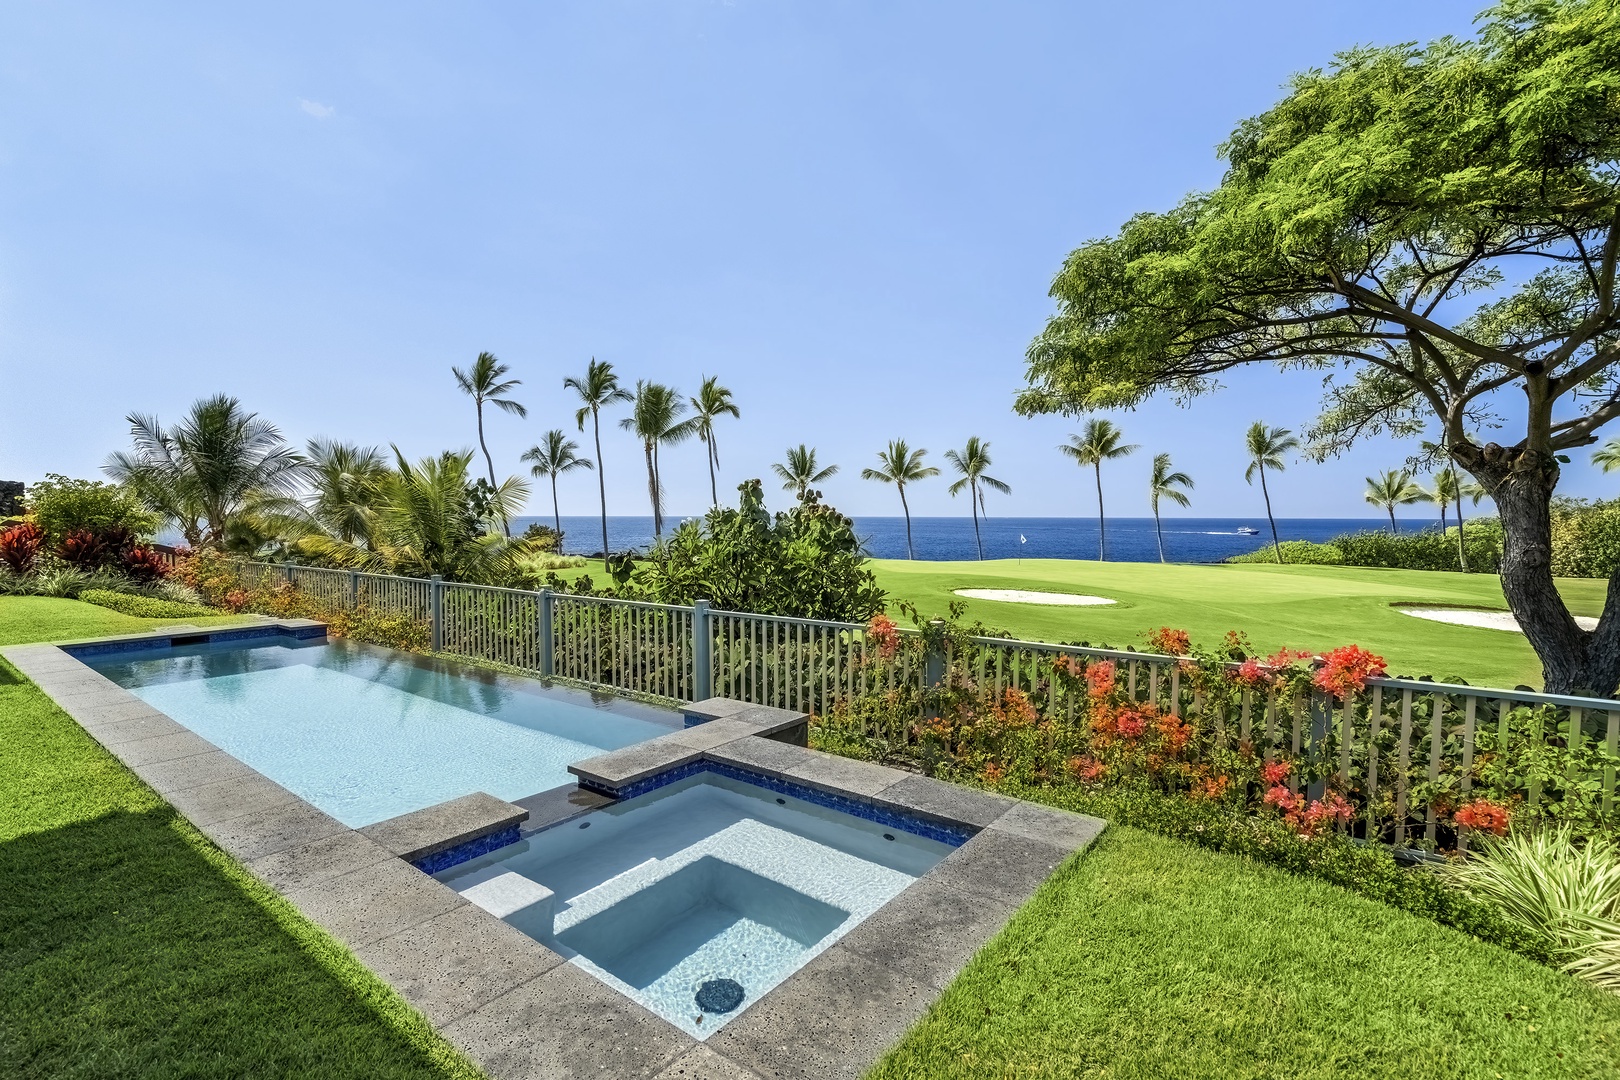 Kailua-Kona Vacation Rentals, Holua Kai #26 - Indulge in a slice of paradise with our ocean view villa in Hawaii